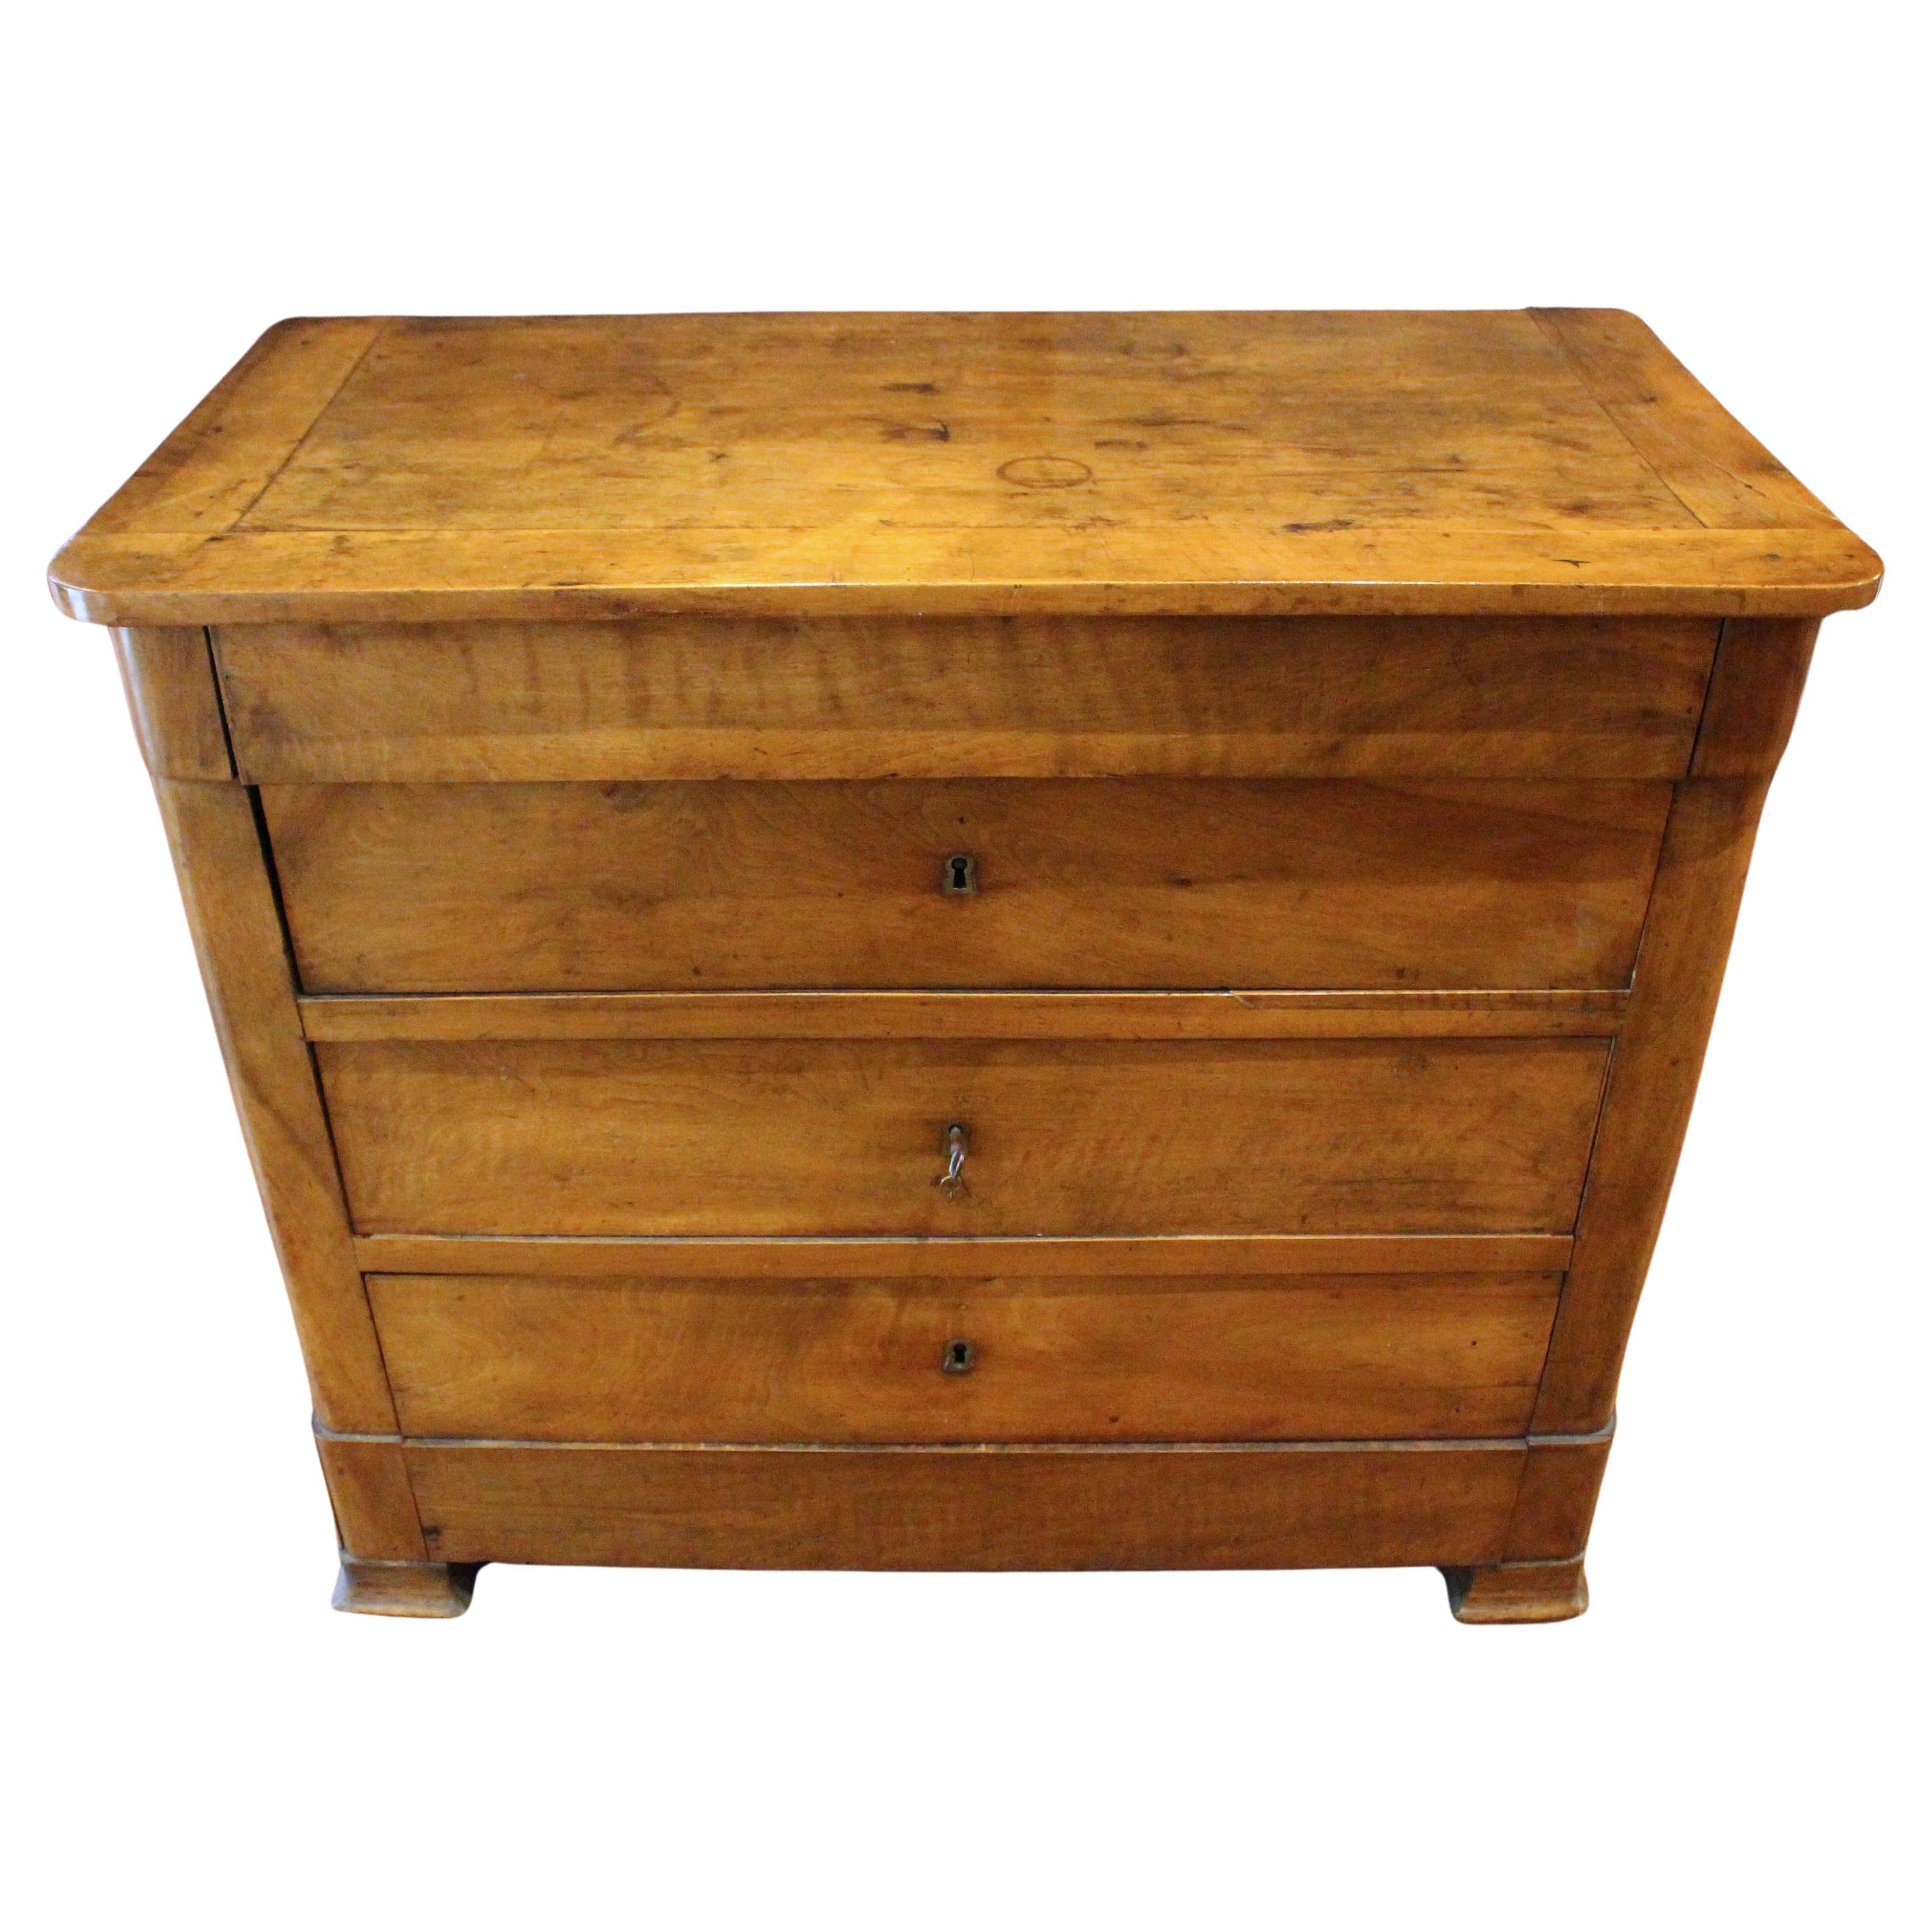 Circa 1830 Country French Louis Philippe Commode Chest of Draps en vente